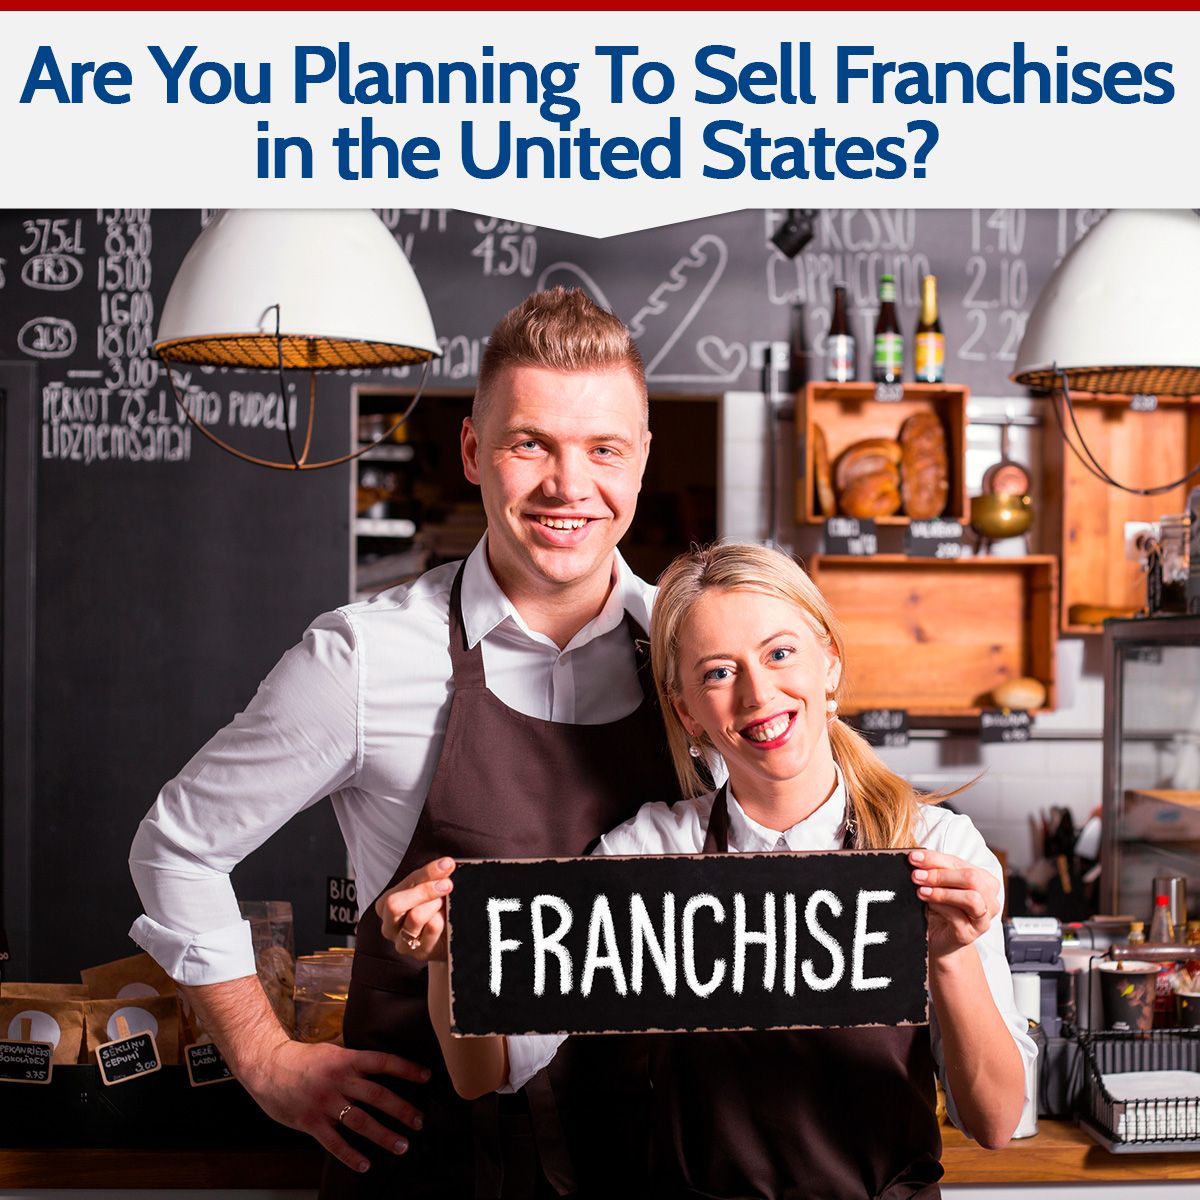 Are You Planning To Sell Franchises in the United States?